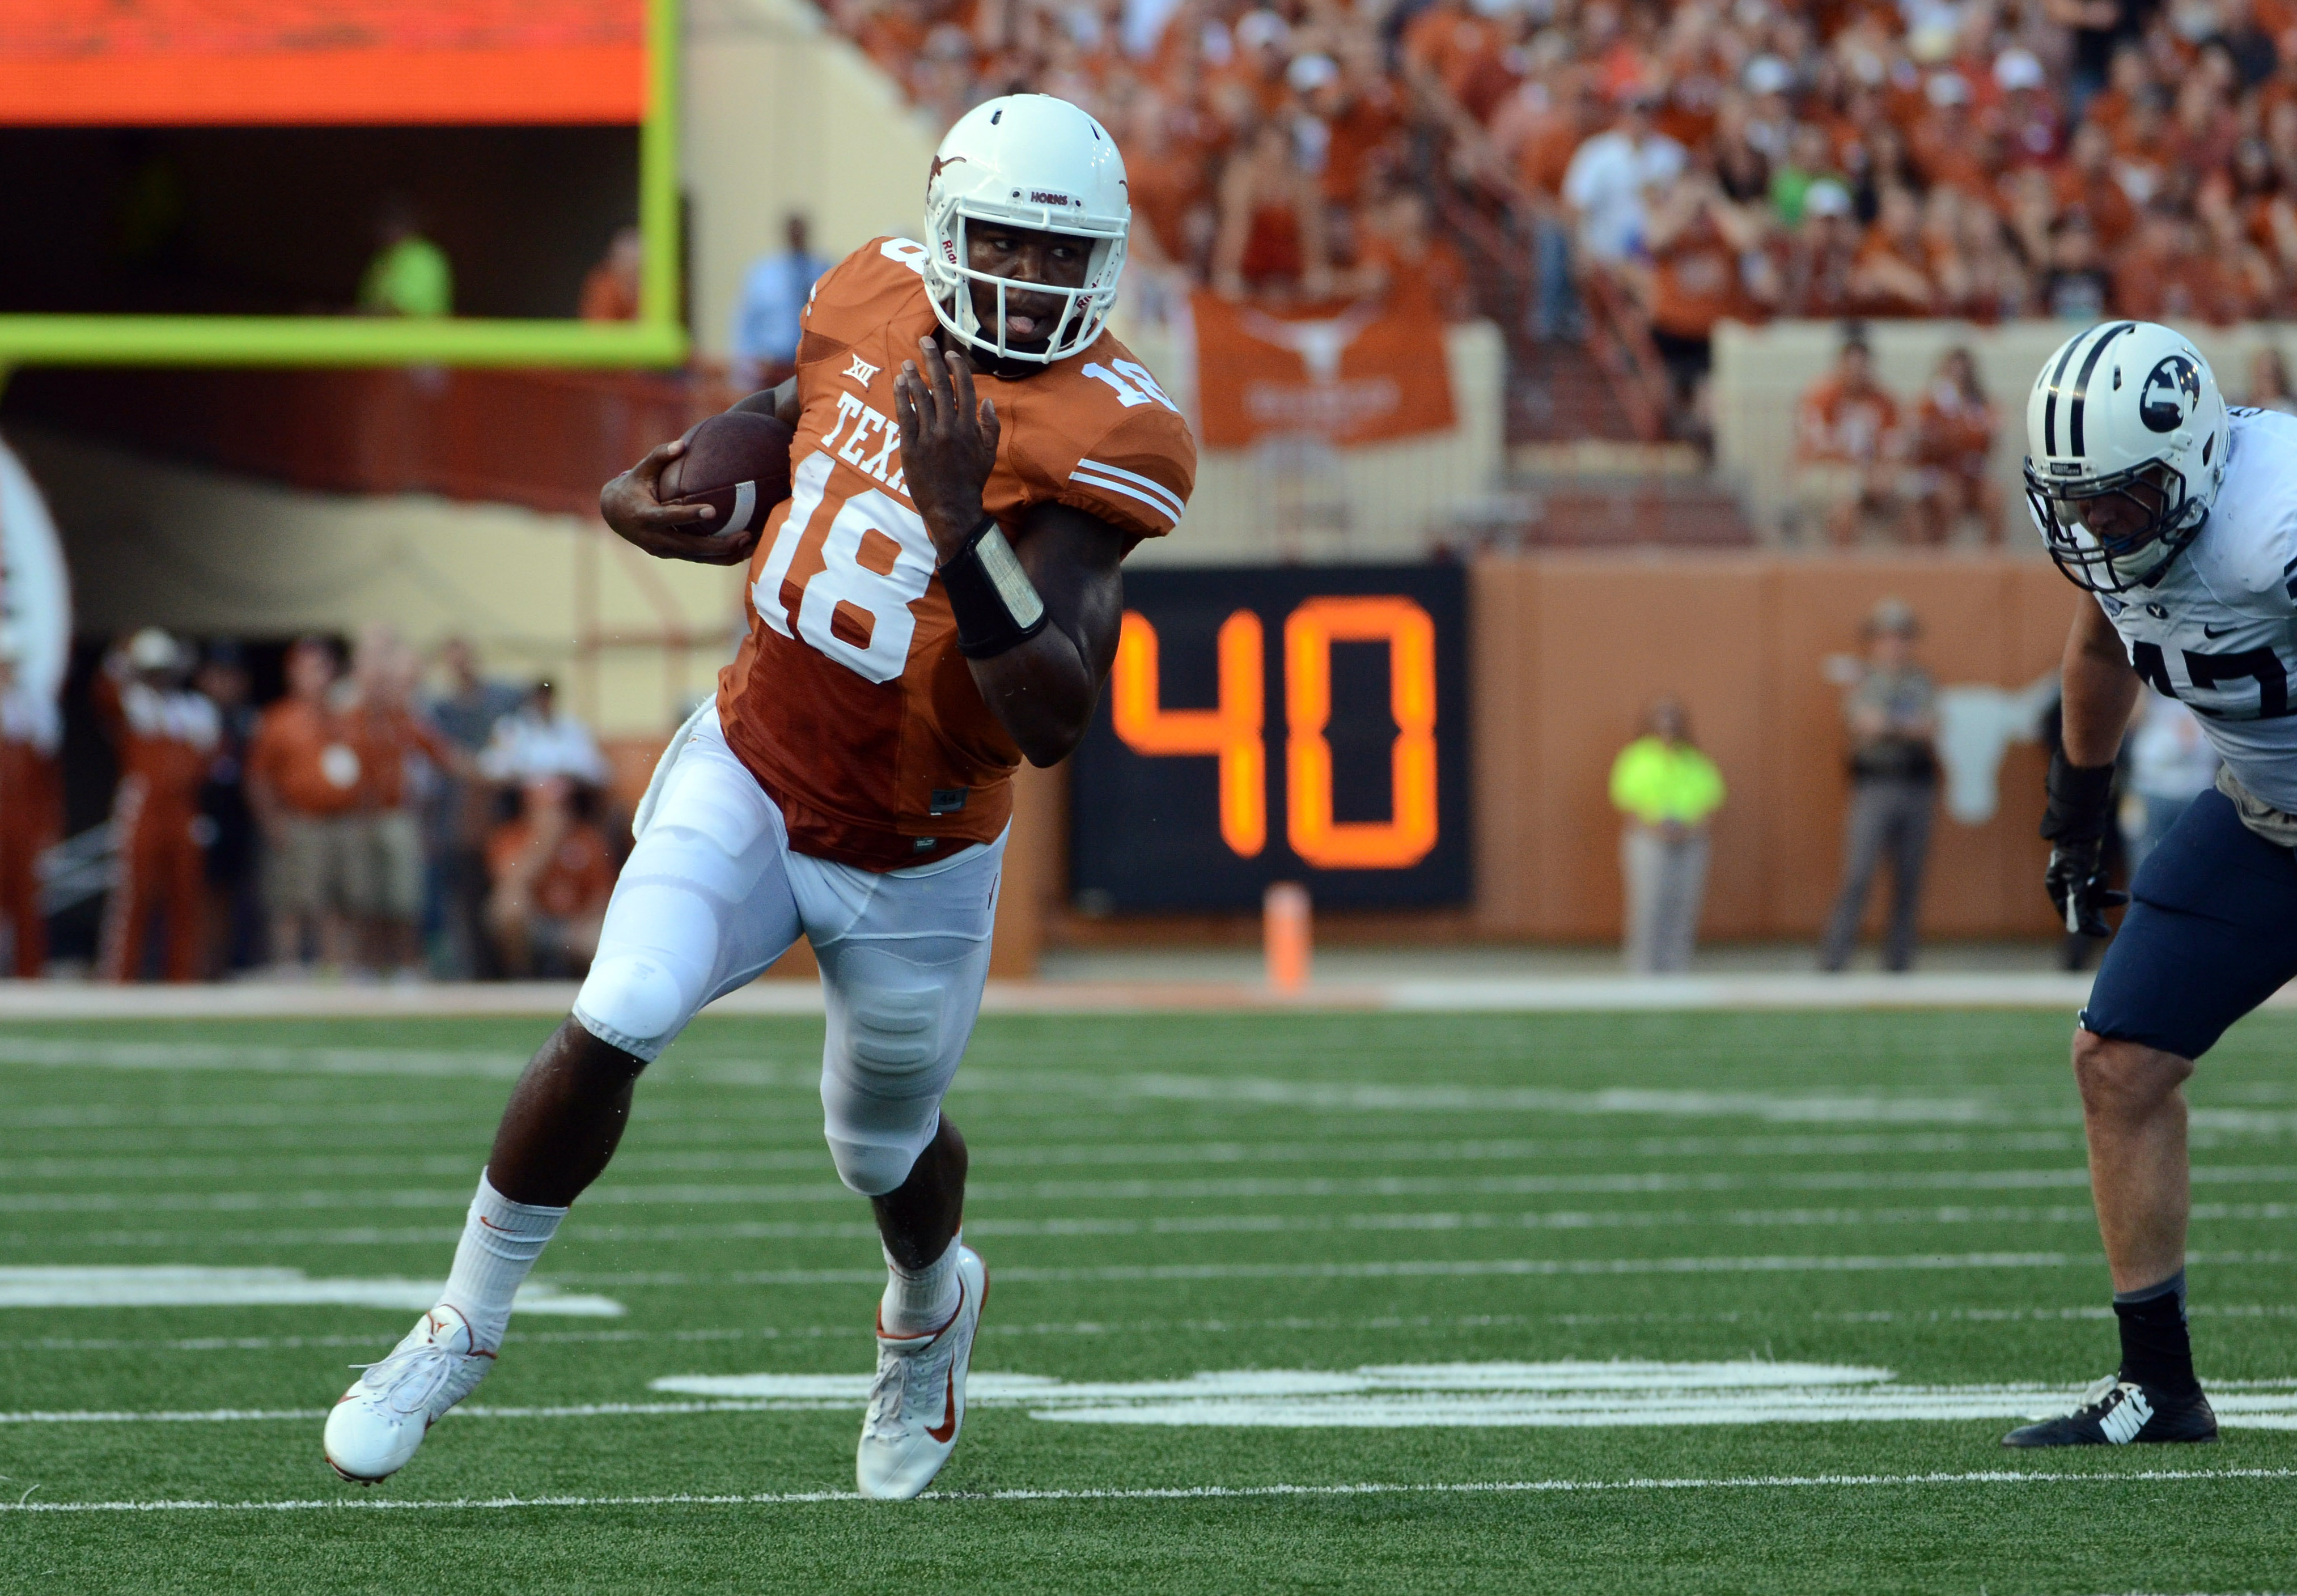 Tyrone Swoopes Named Texas Starting QB: Latest Comments and